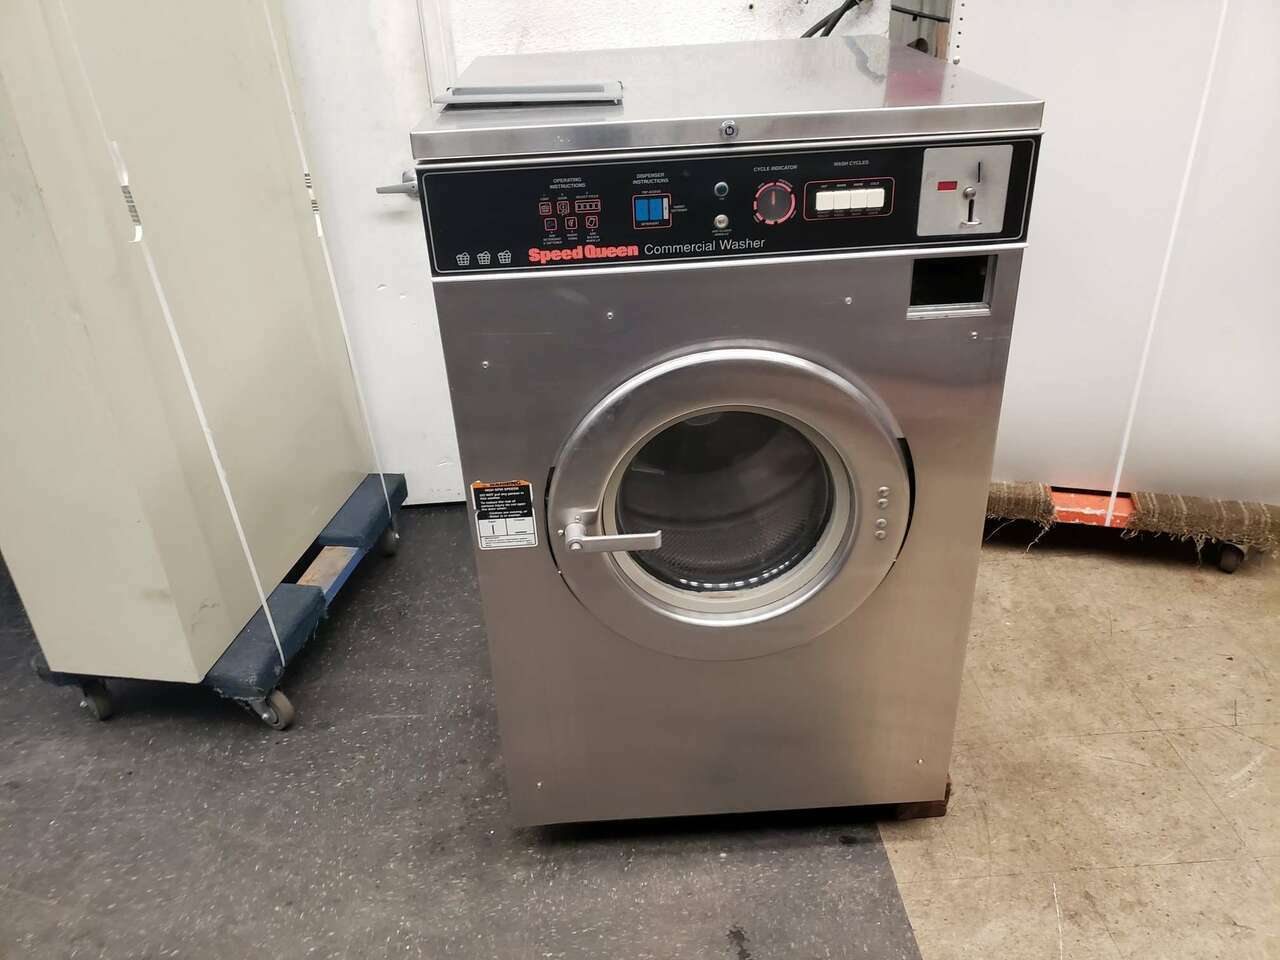 How To Reset Speed Queen Commercial Washer